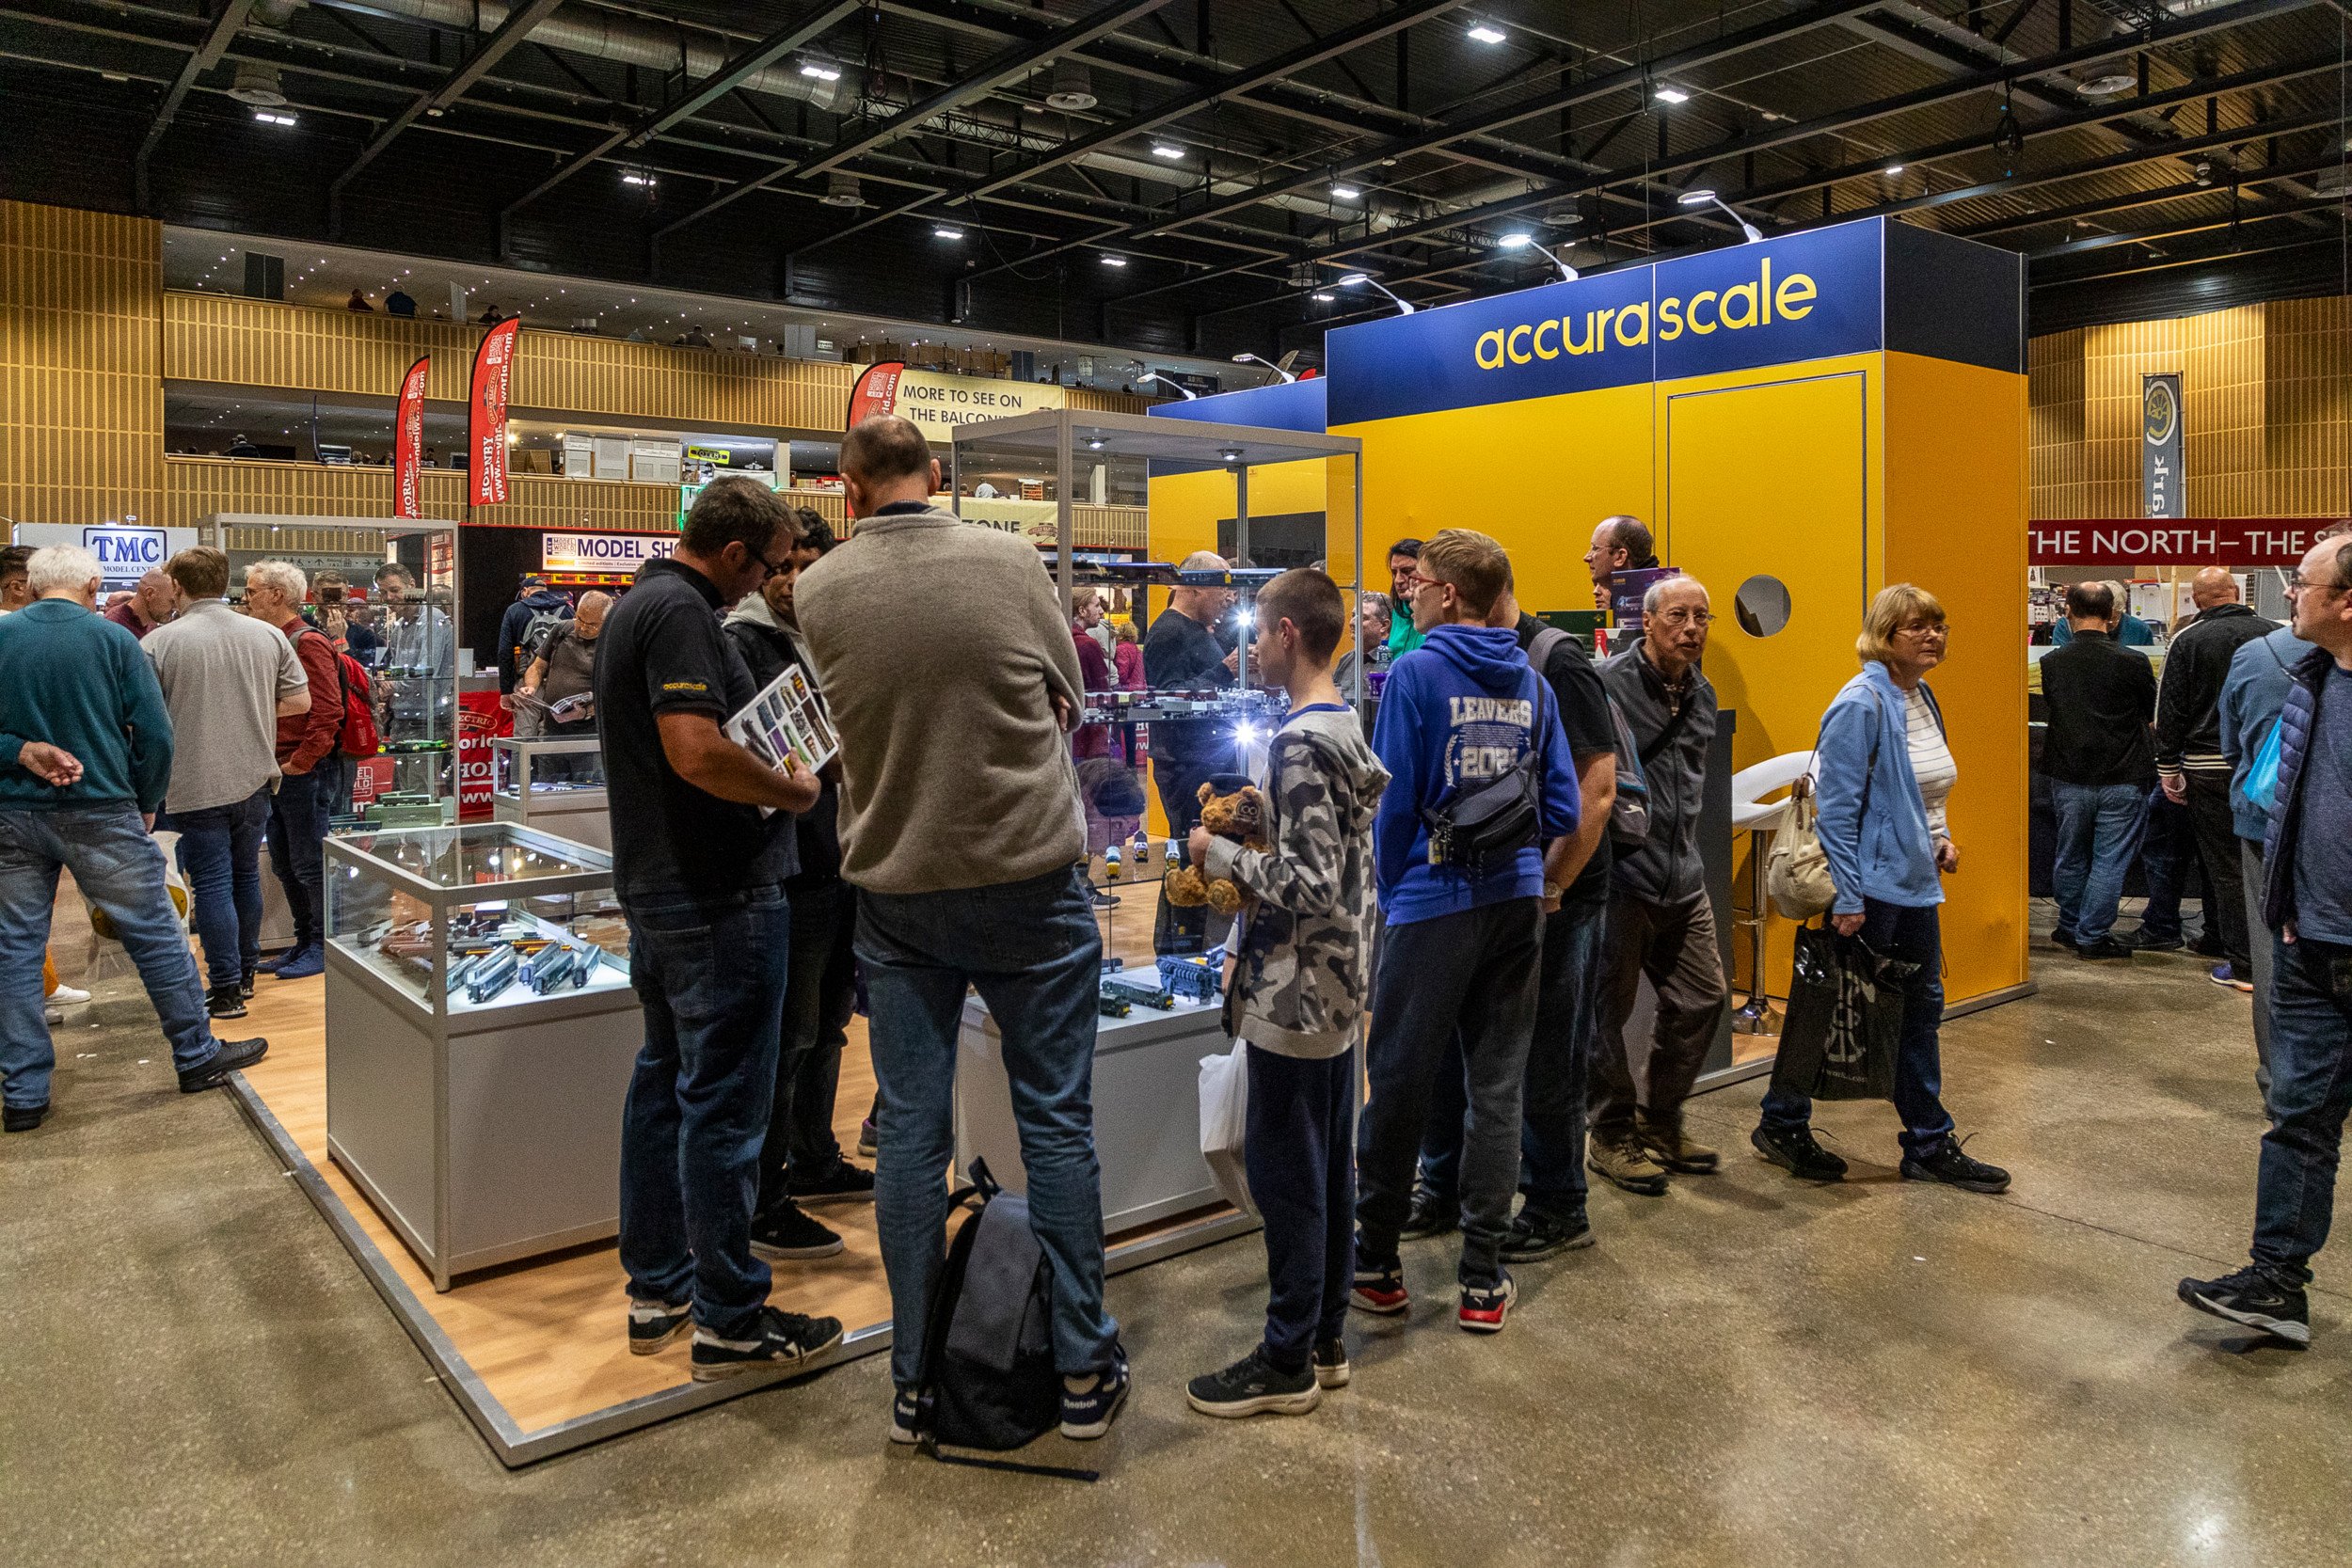 Accurascale is the first sponsor to be announced for Model World LIVE and will be bringing its show stand and the latest product samples to the show.